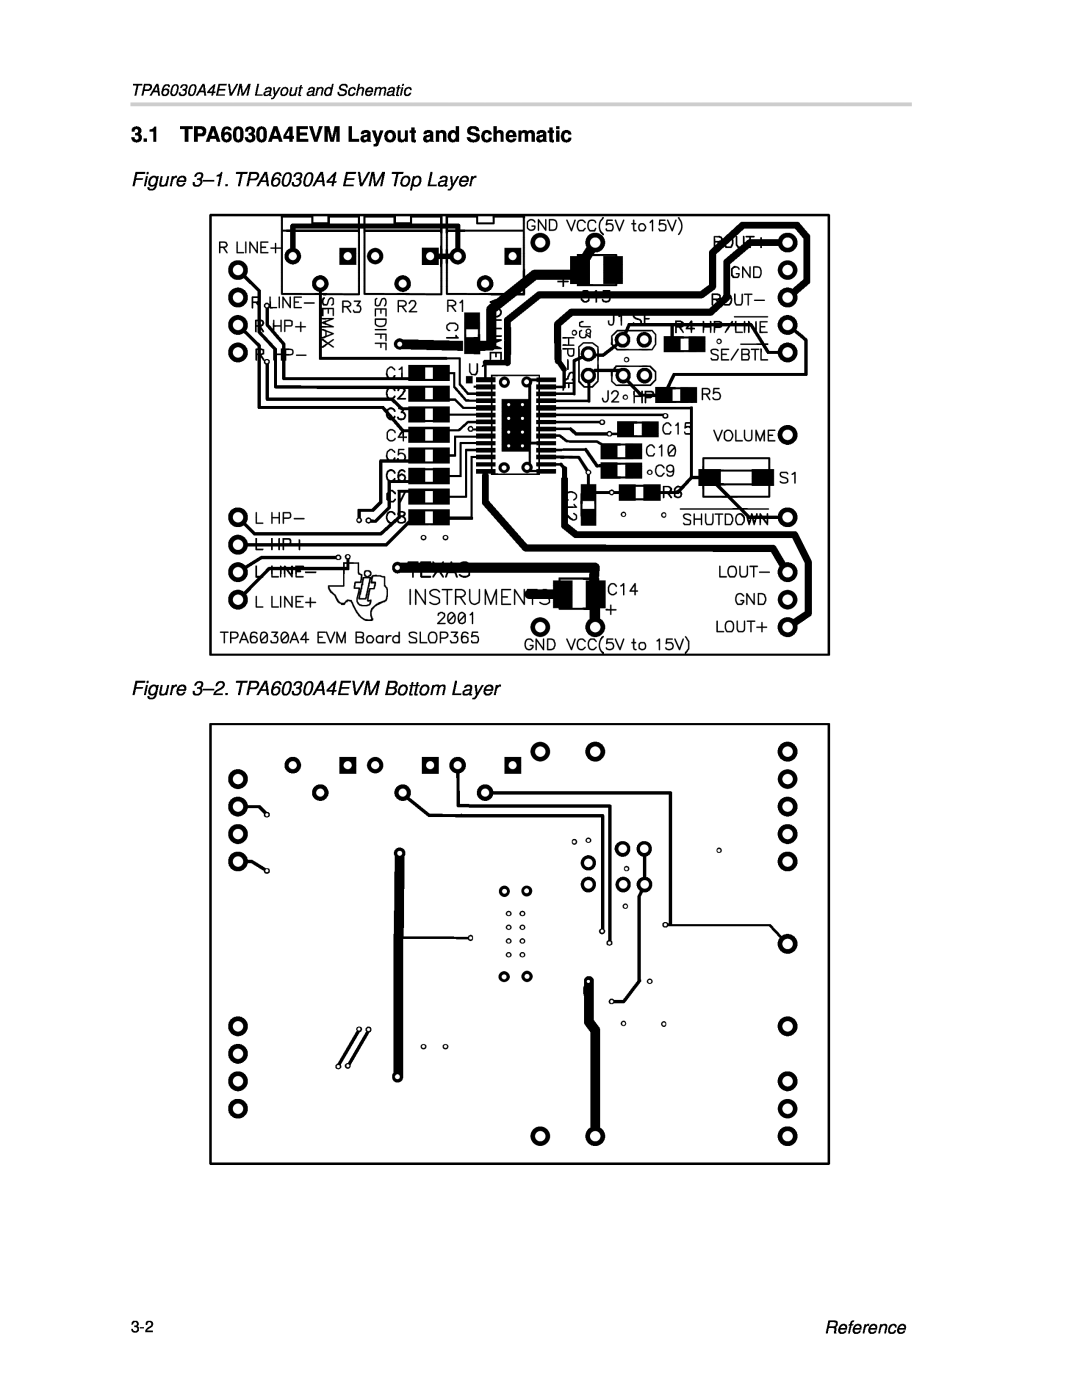 Texas Instruments manual 3.1 TPA6030A4EVM Layout and Schematic, 1.TPA6030A4 EVM Top Layer, 2.TPA6030A4EVM Bottom Layer 